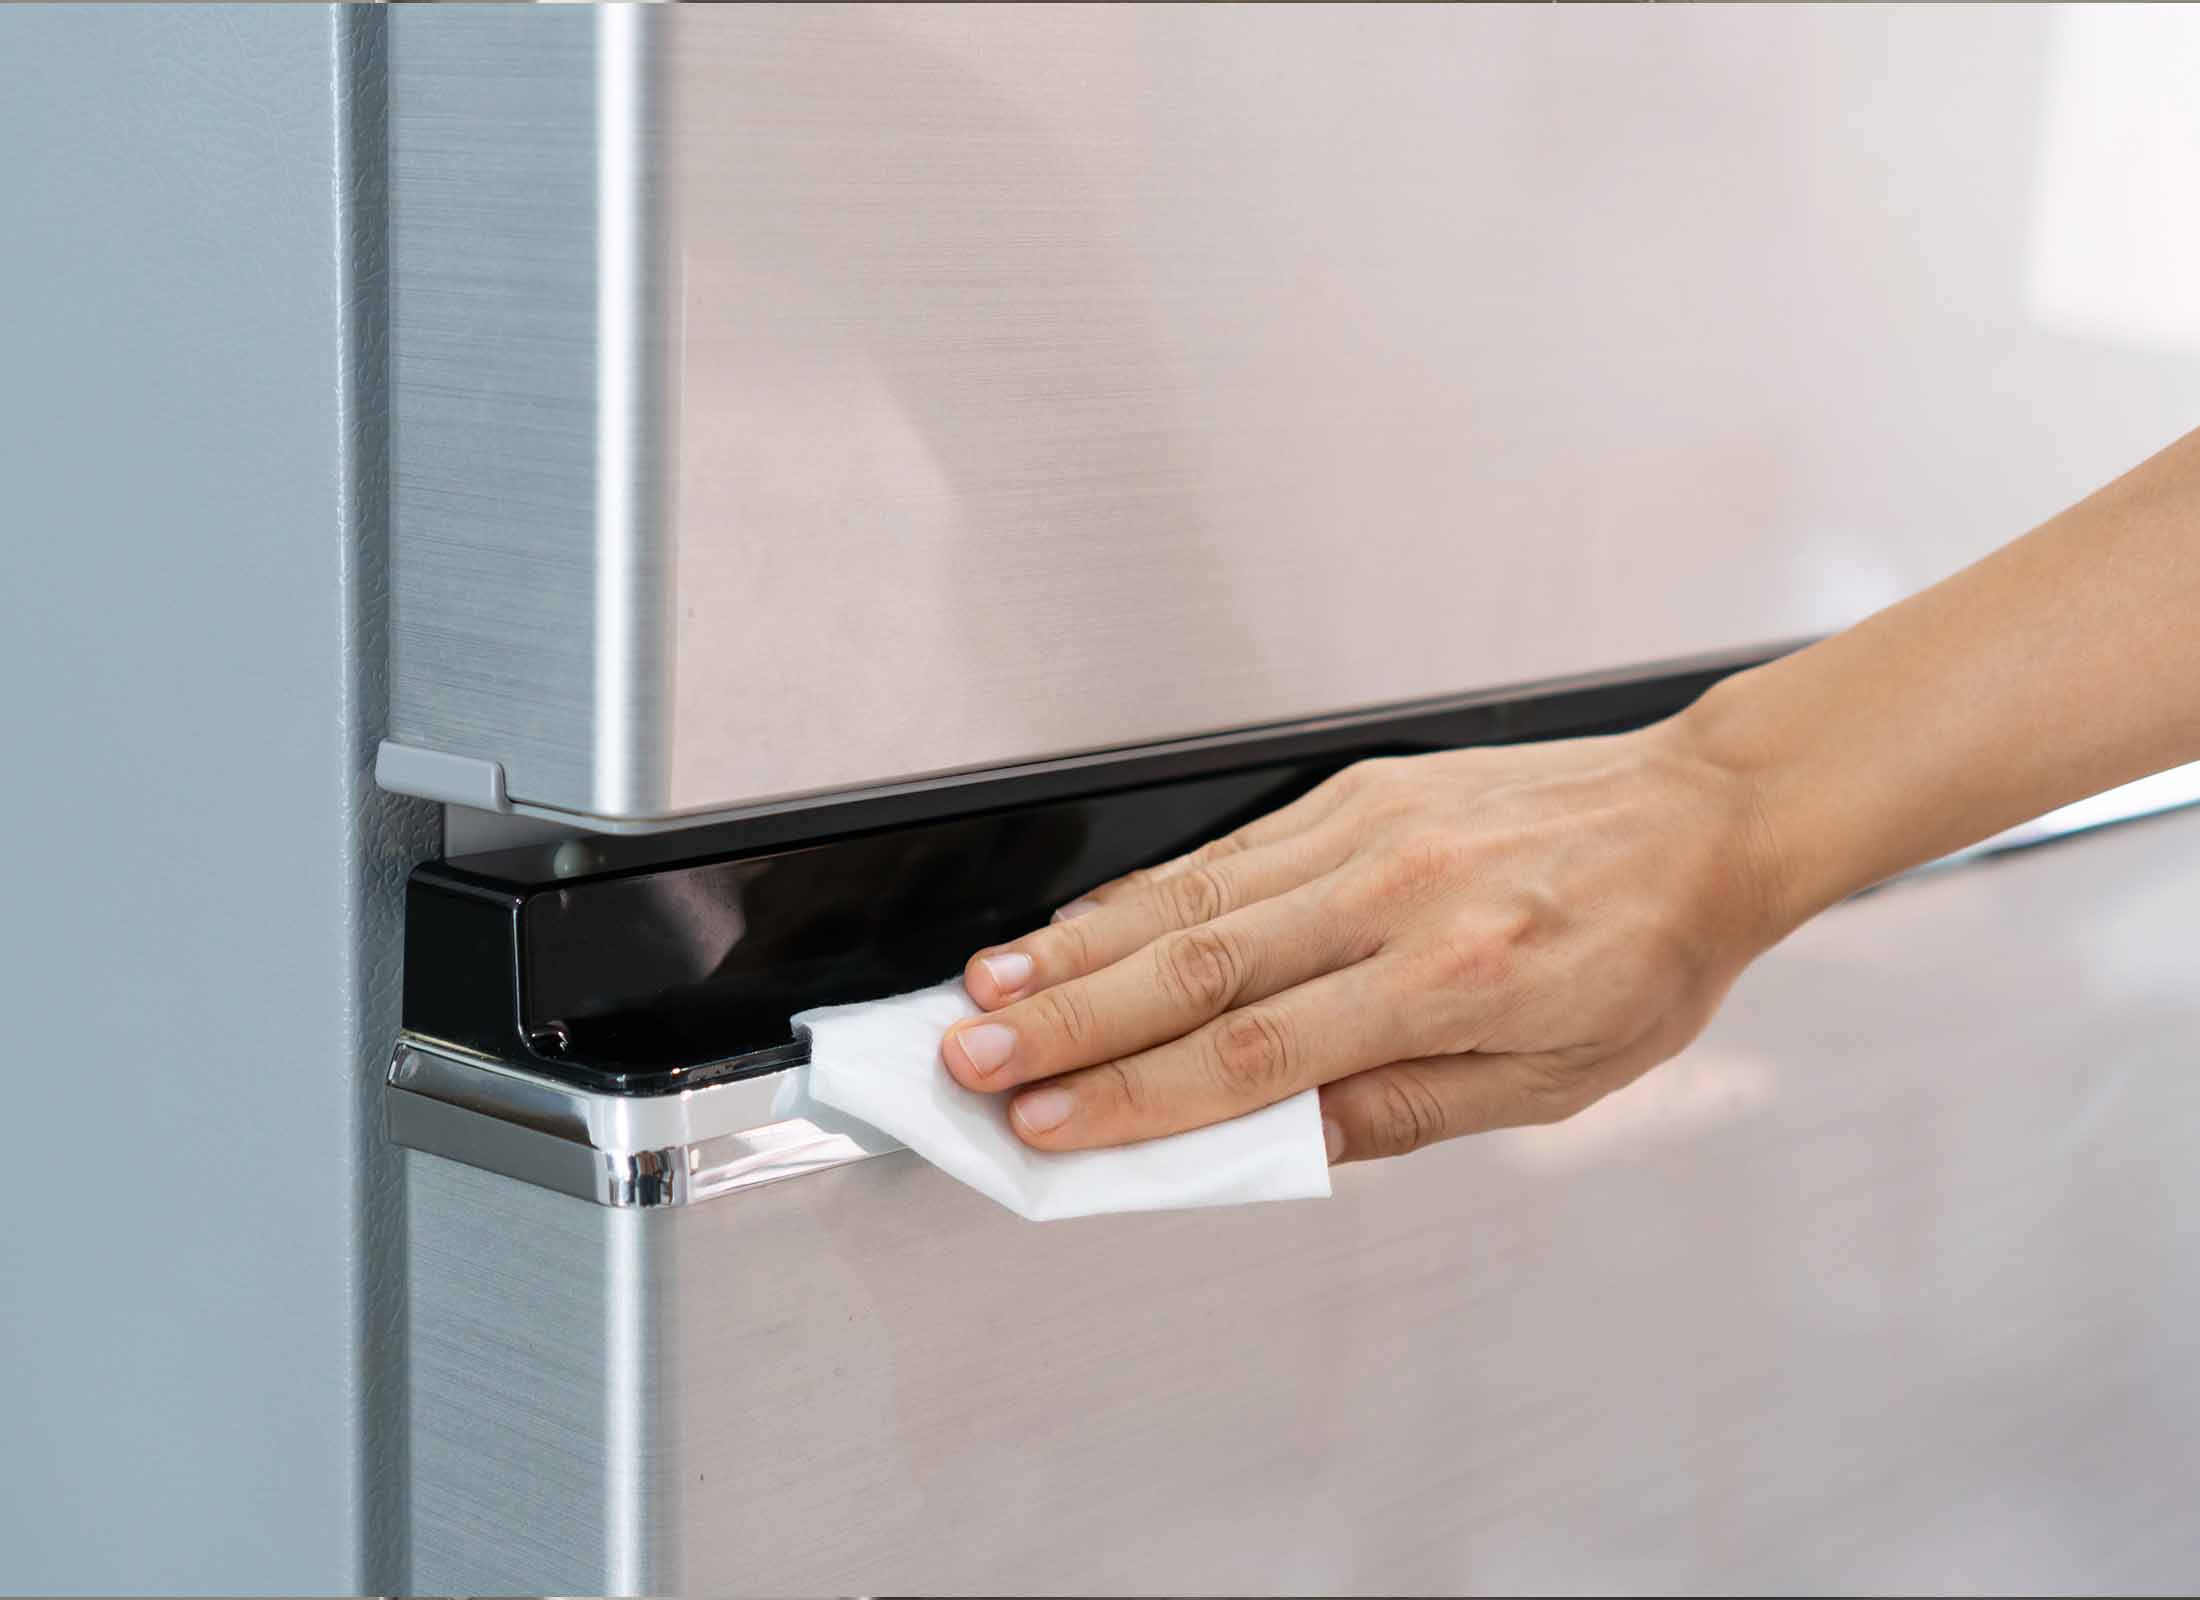 Hand Wiping Stainless Steel Refrigerator